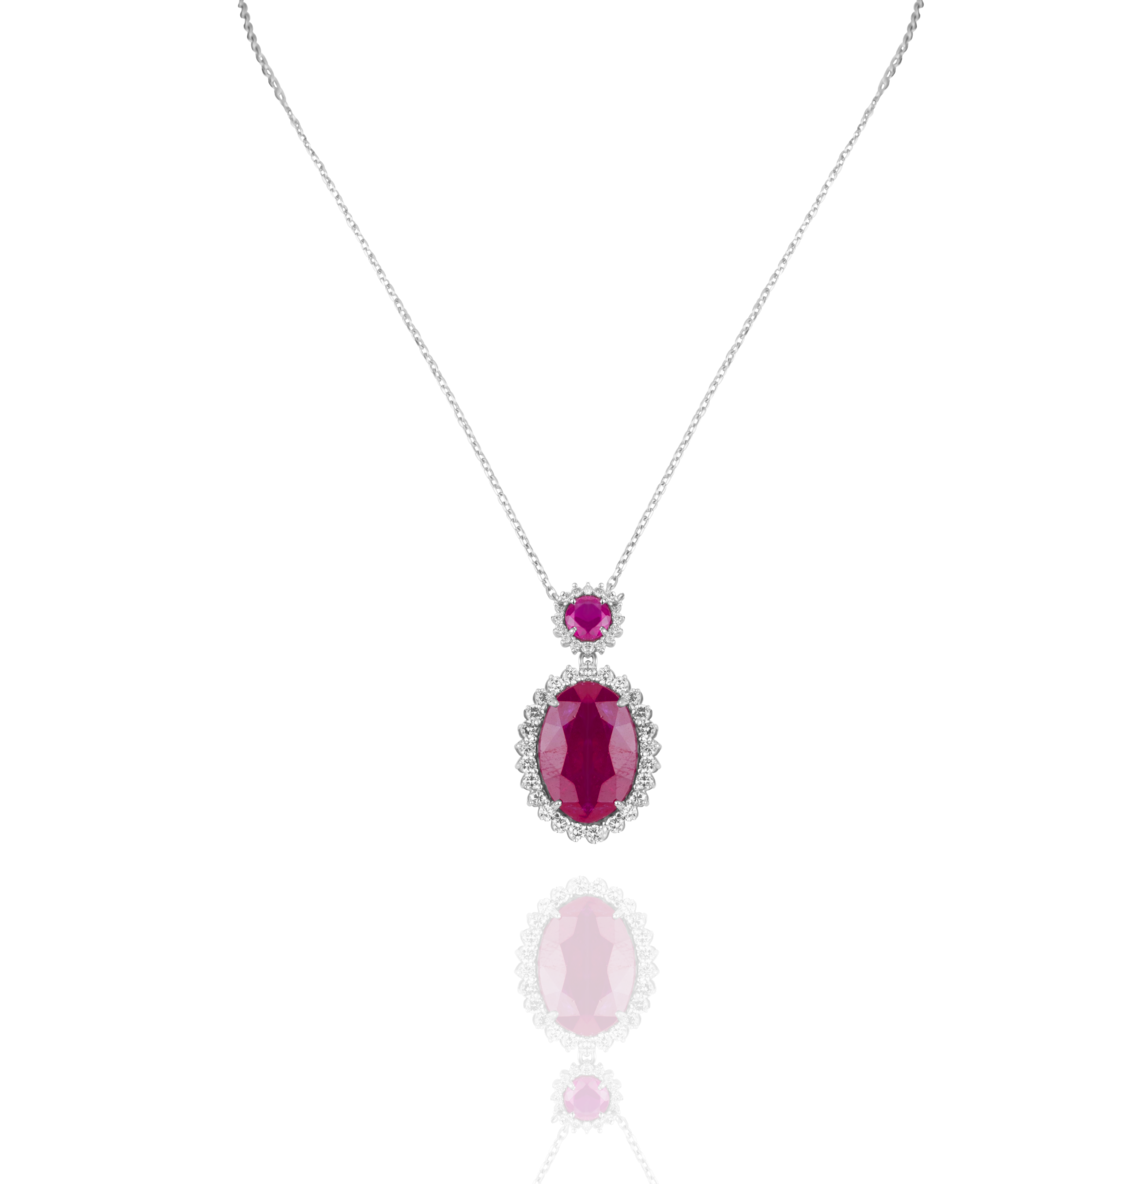 Eternal Diamond Necklace with Colored Stones